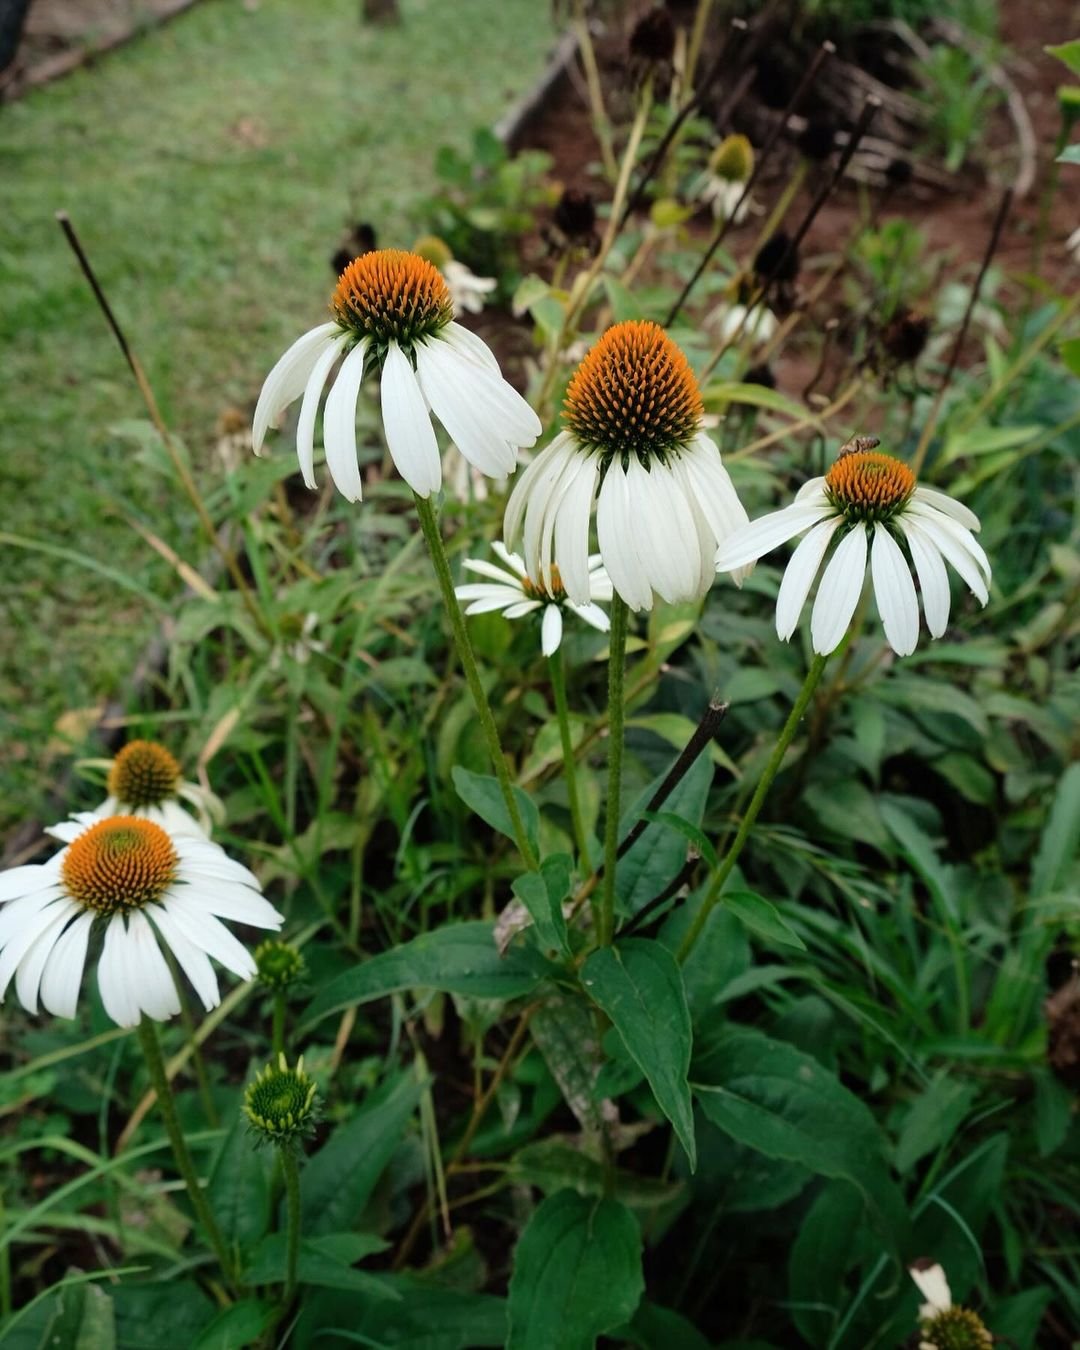 White Coneflower (Echinacea purpurea 'White Swan') - a cluster of white flowers with vibrant yellow centers.

